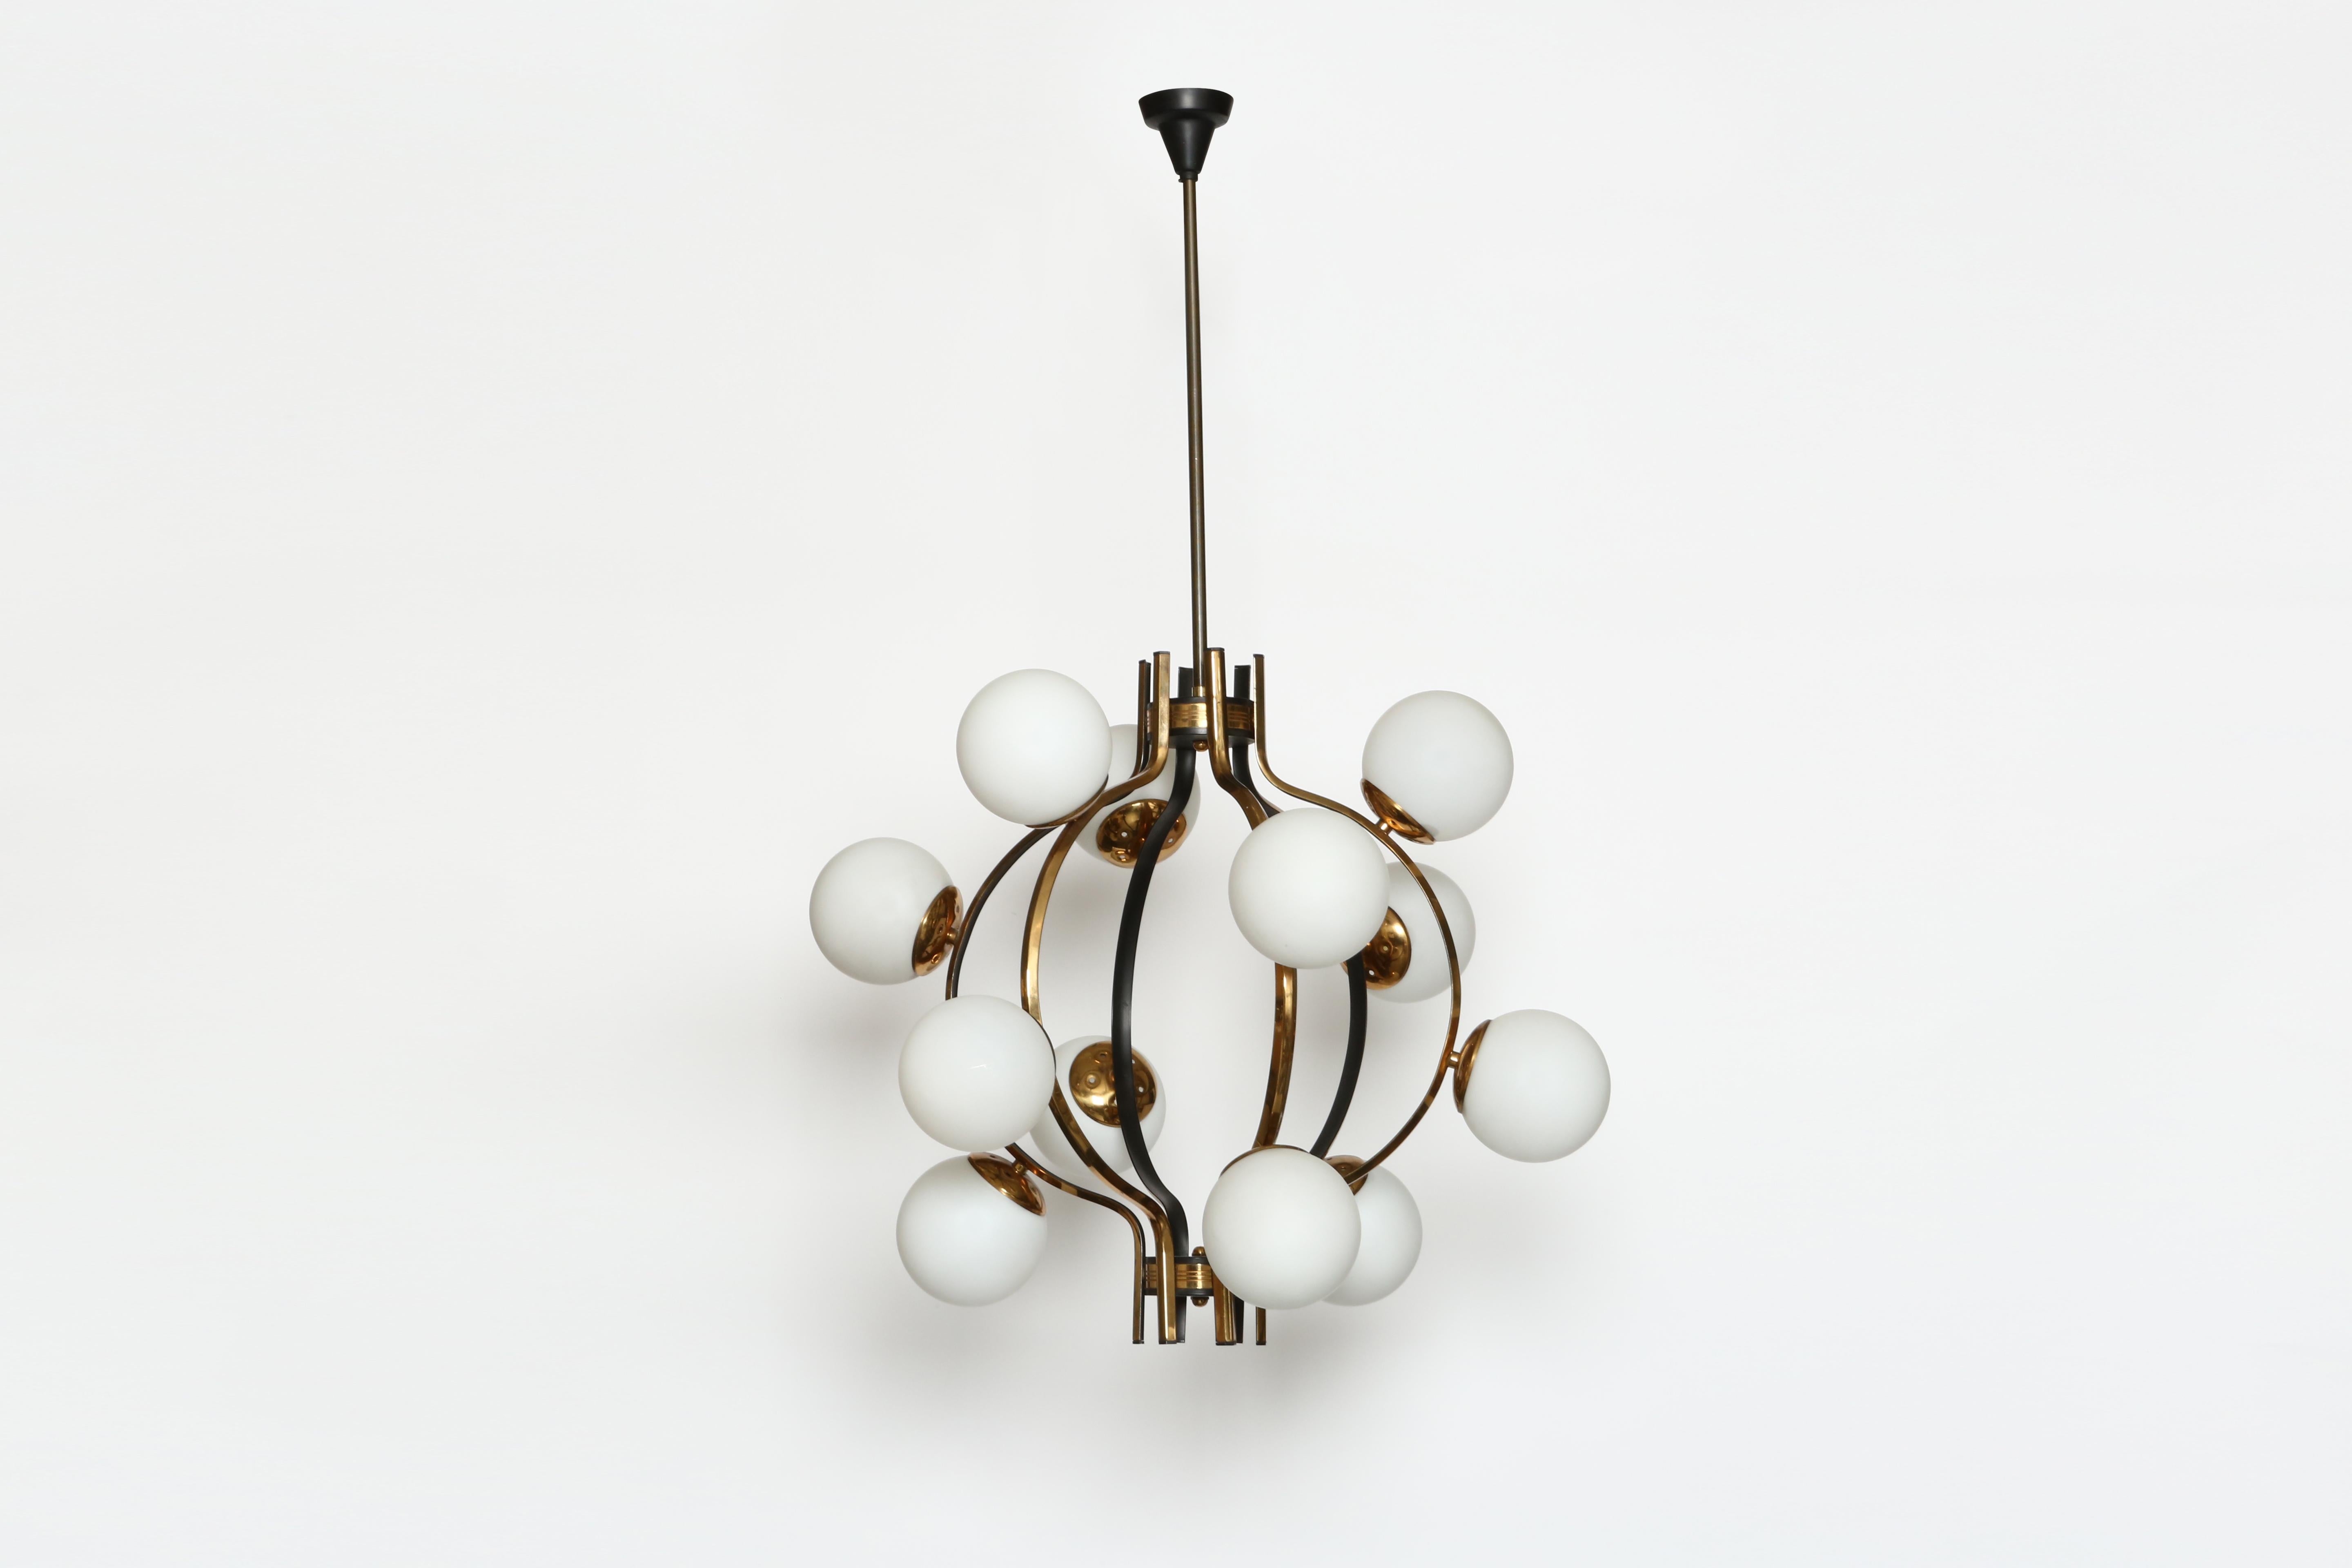 Stilnovo chandelier.
Made with brass, enameled metal and opaline glass globes.
12 globes.
Italy, 1950s.